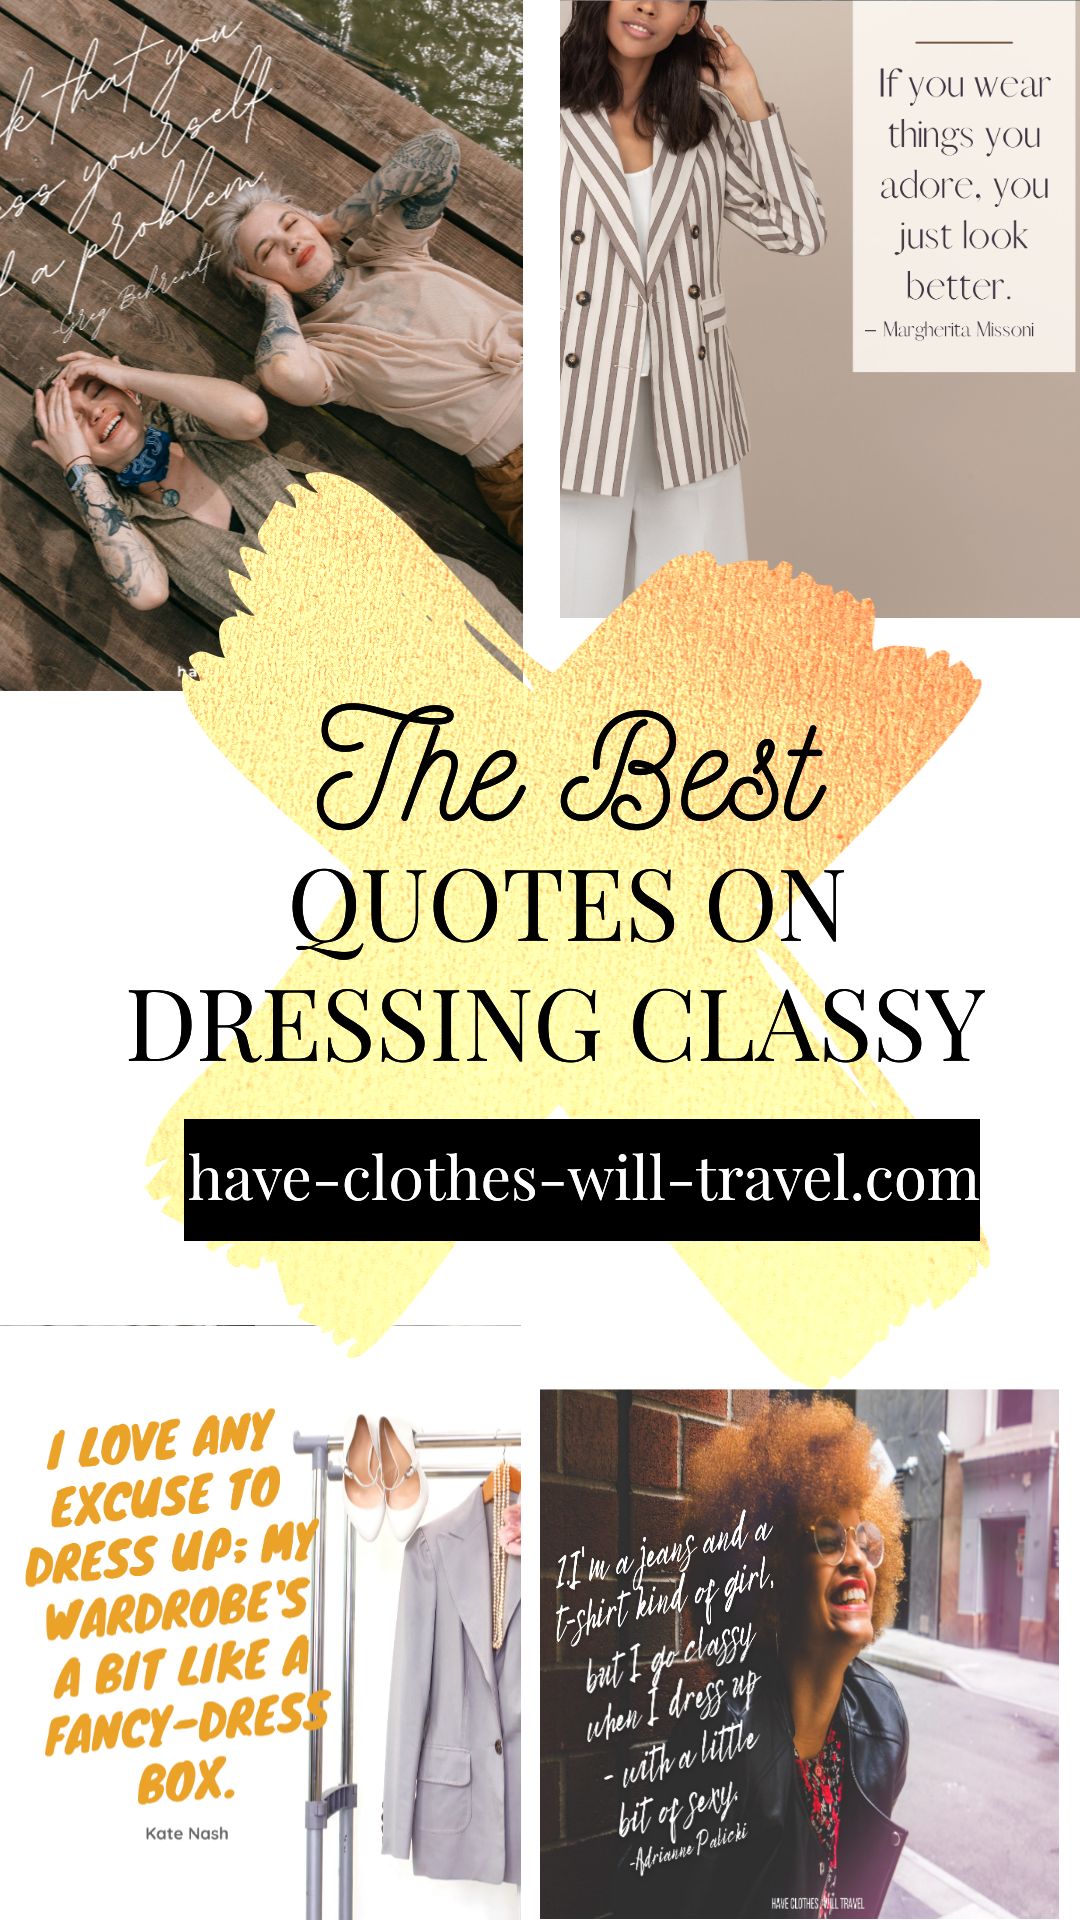 A collage of four images show fashion-forward photoshoots, with models wearing stylish clothing. Text in the center of the image says "the best quotes on dressing classy" and "have-clothes-will-travel.com"